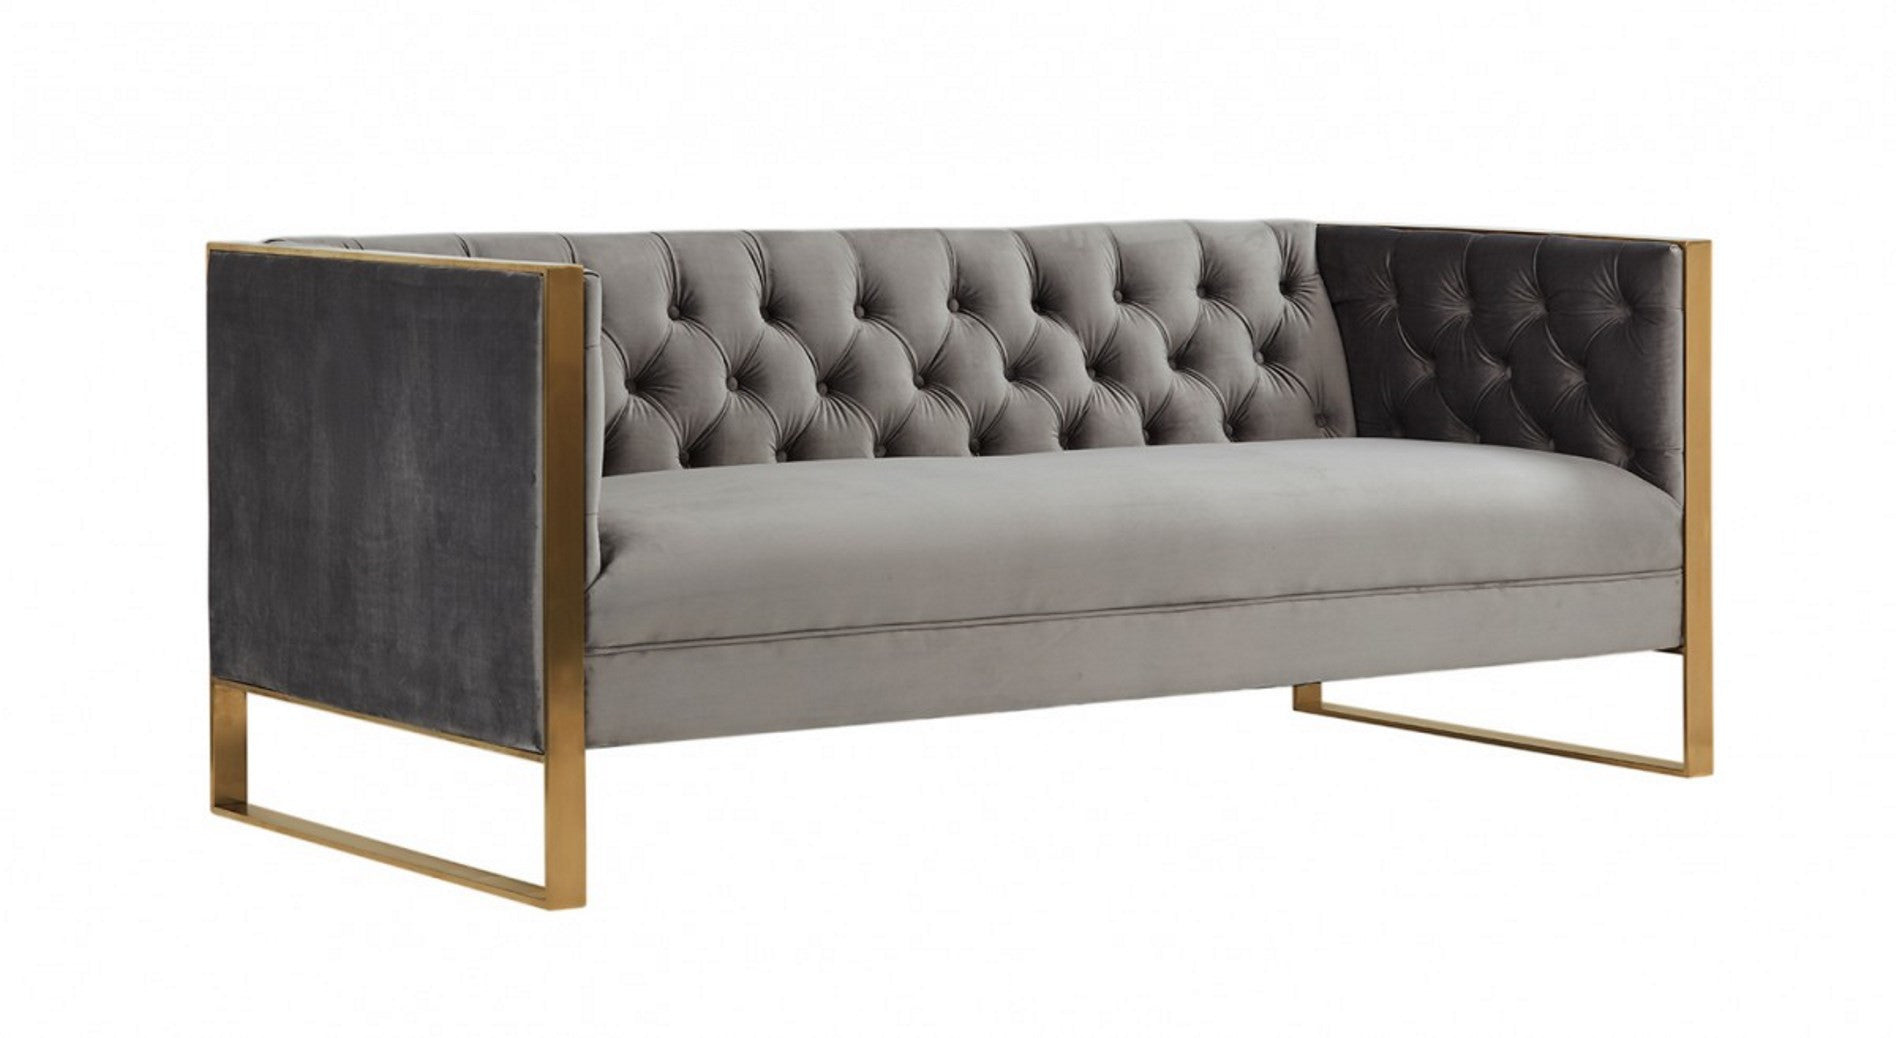 75" Grey and Gold Tufted Velvet Chesterfield Style Sofa-0